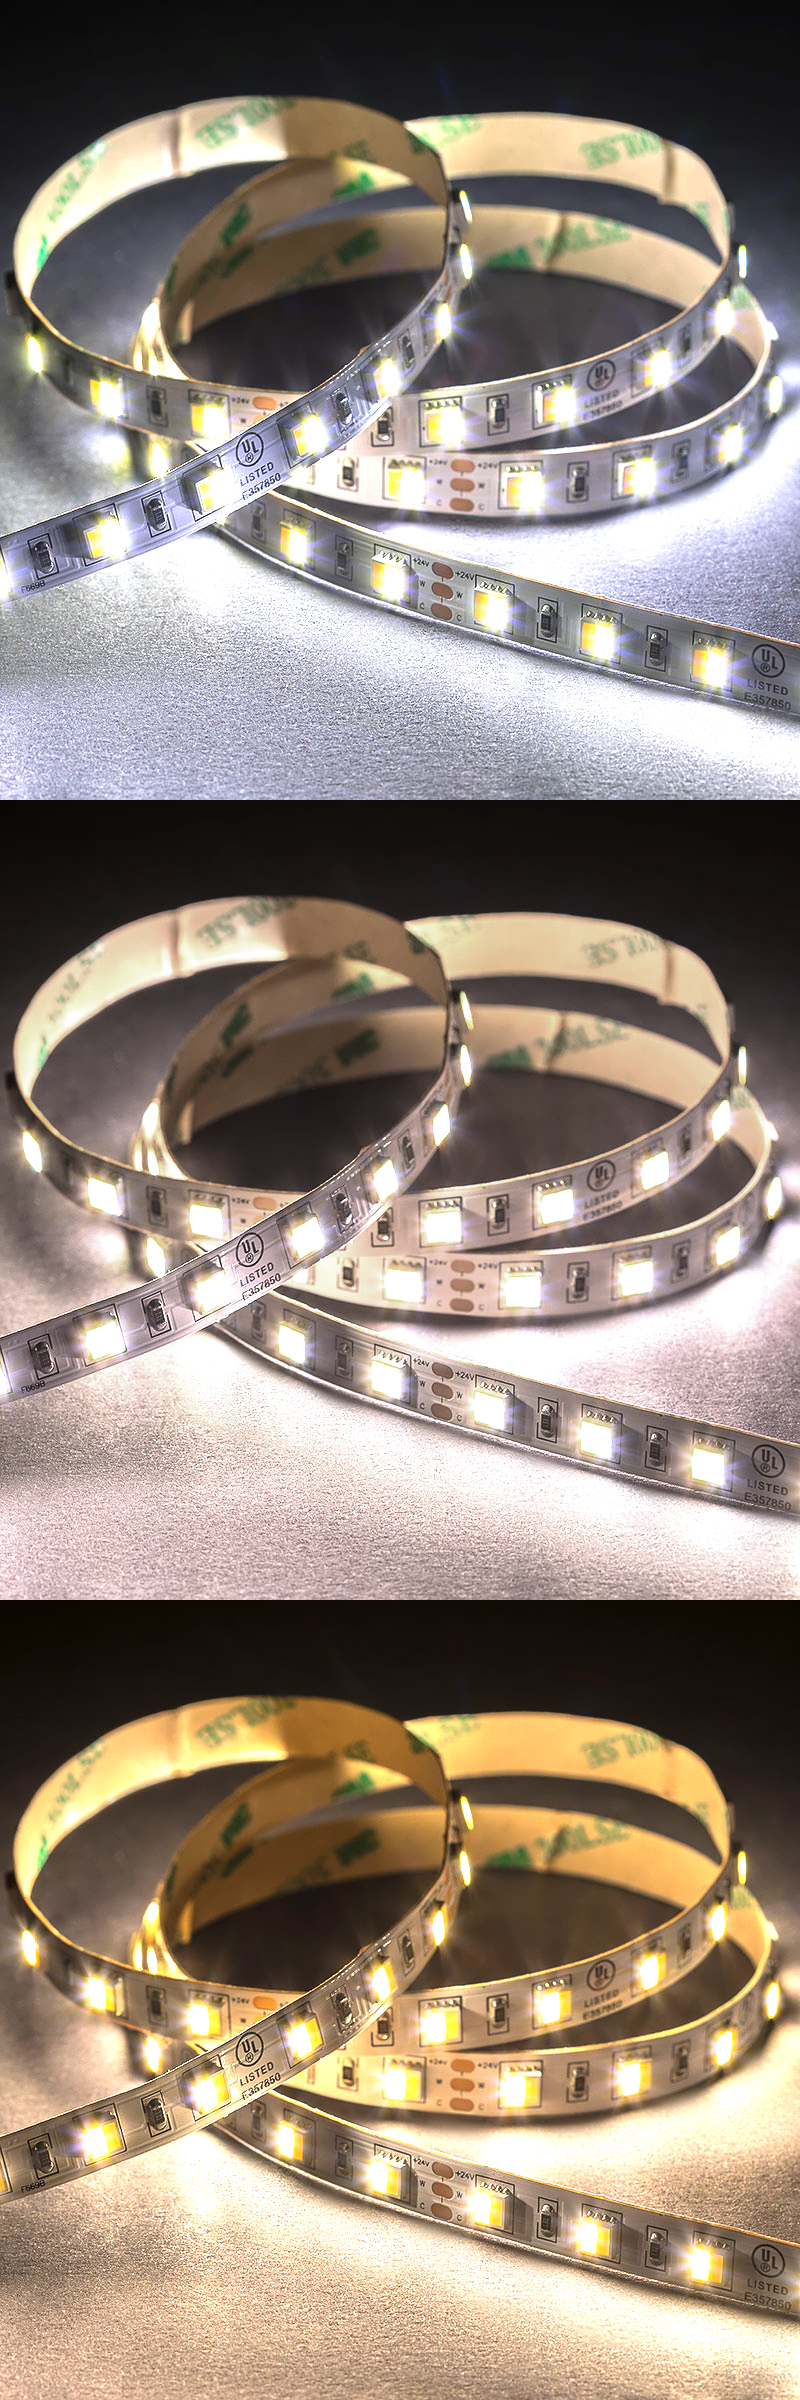 5m Tunable White LED Strip Light - LED Tape Light - 24V - IP20 - Tunable White - 196.9in (16.40ft) - Click Image to Close